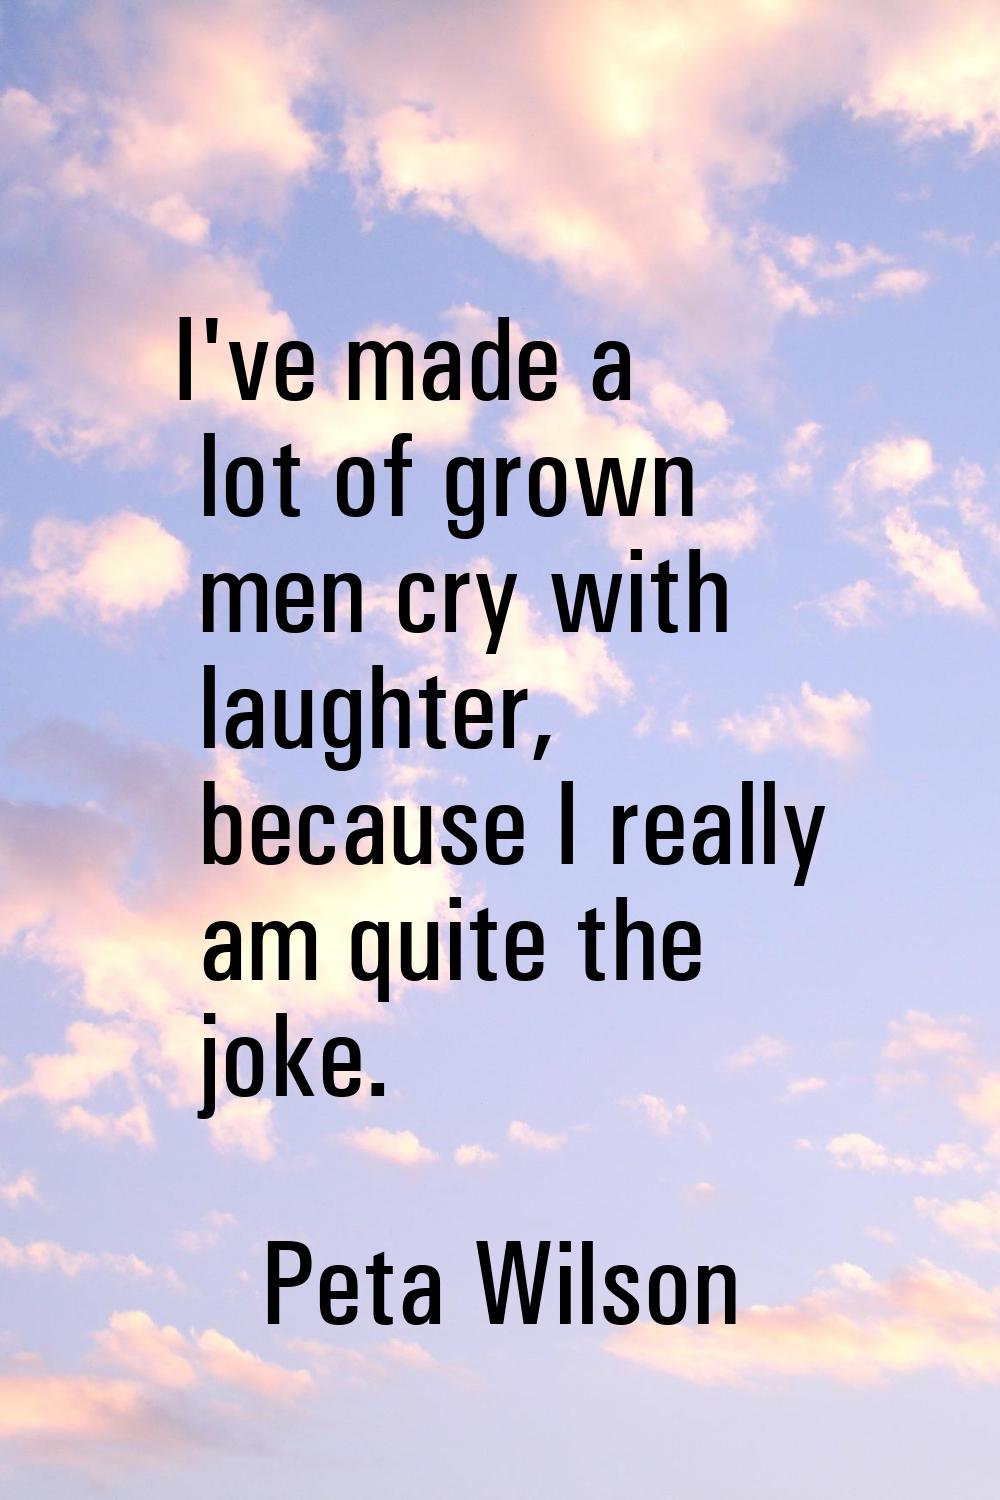 I've made a lot of grown men cry with laughter, because I really am quite the joke.